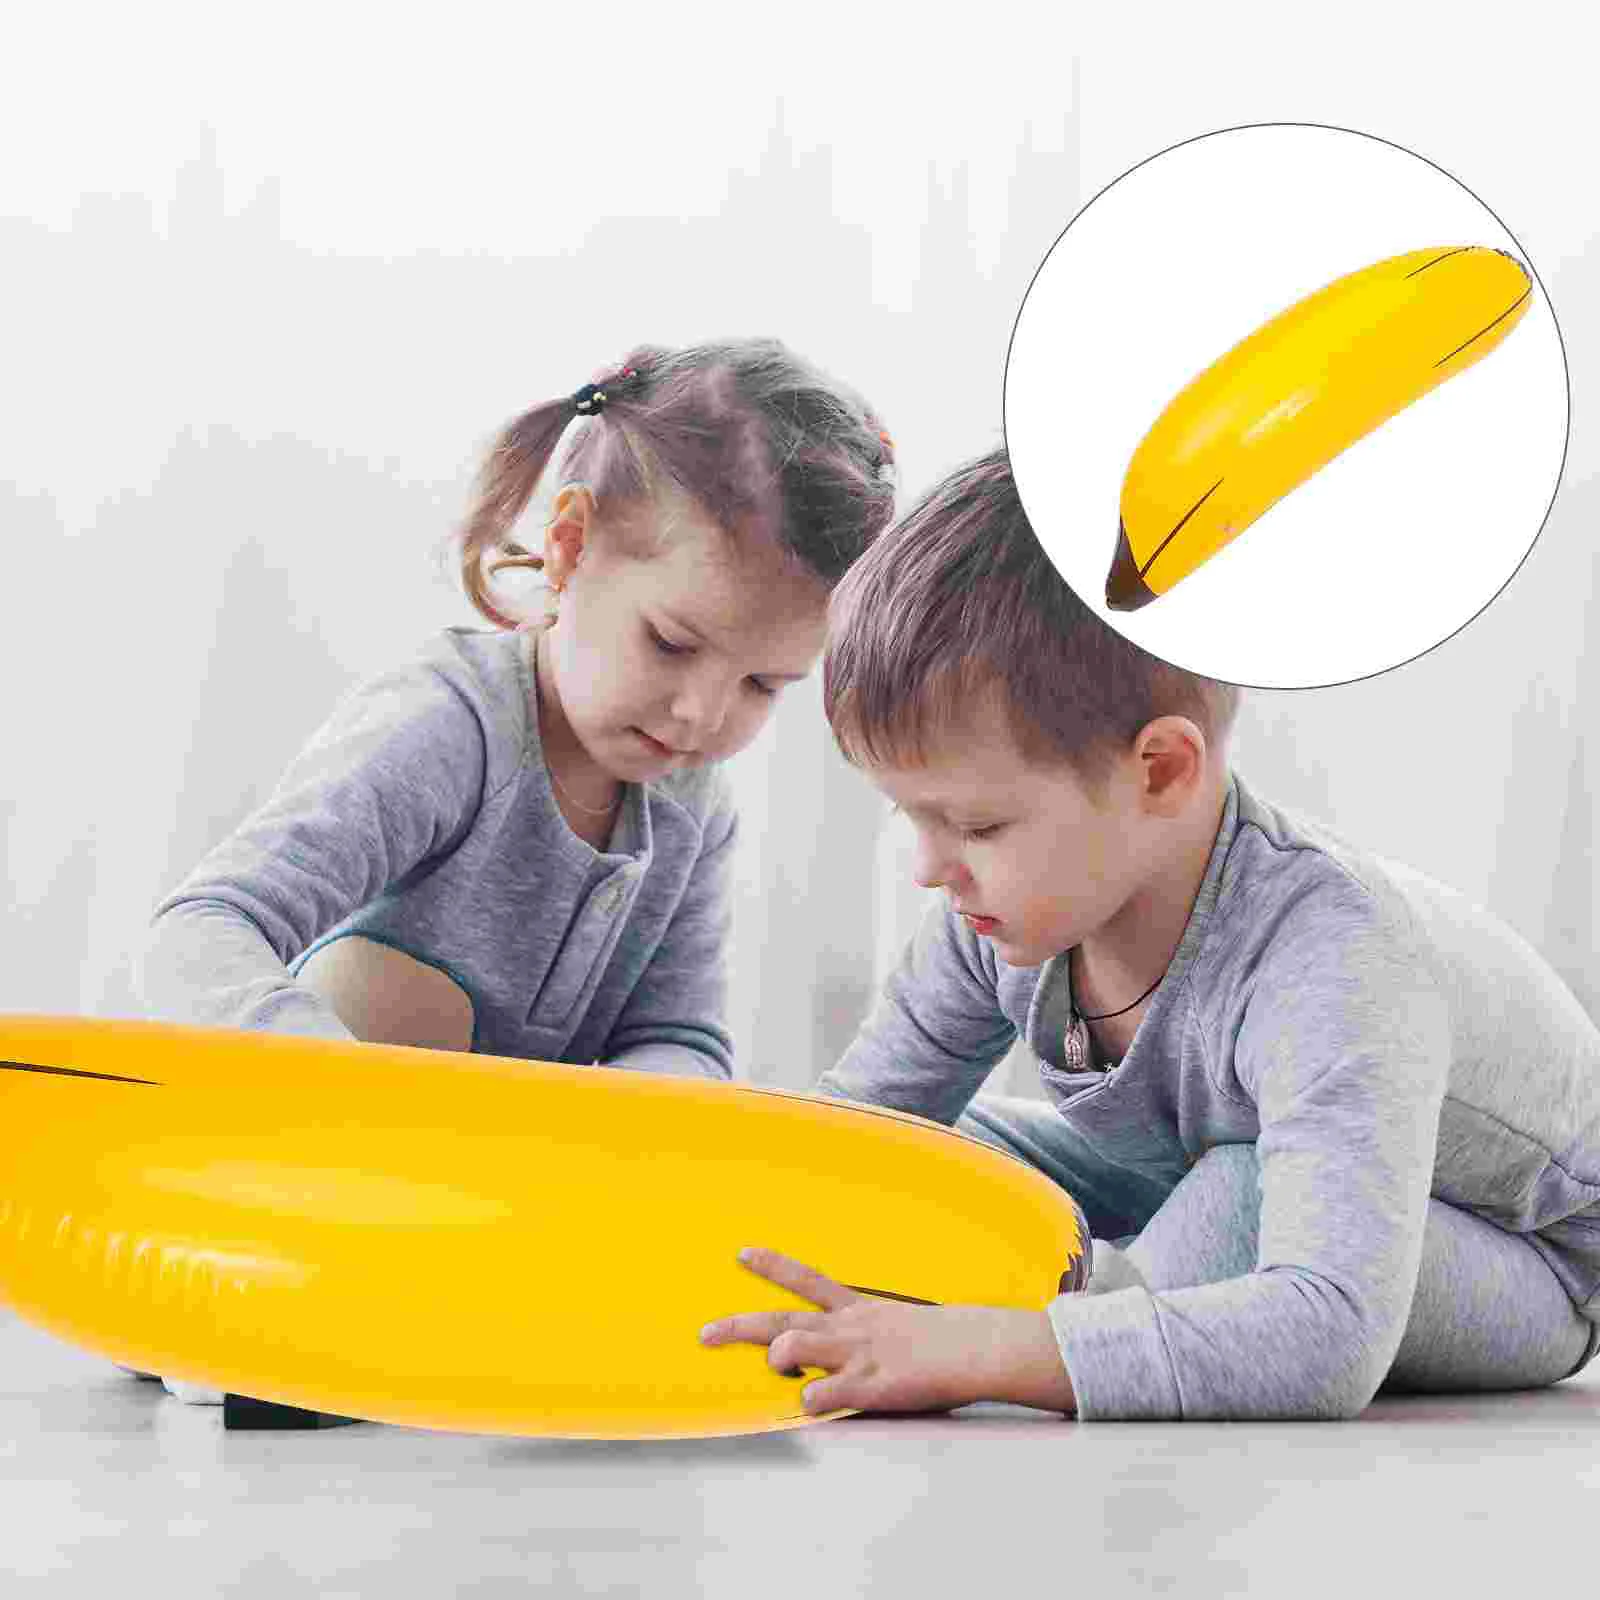 

3 Pcs Inflatable Banana Toy Kiddie Pool Toss Decor Bridal Shower Ring PVC Party Decoration Bride Game